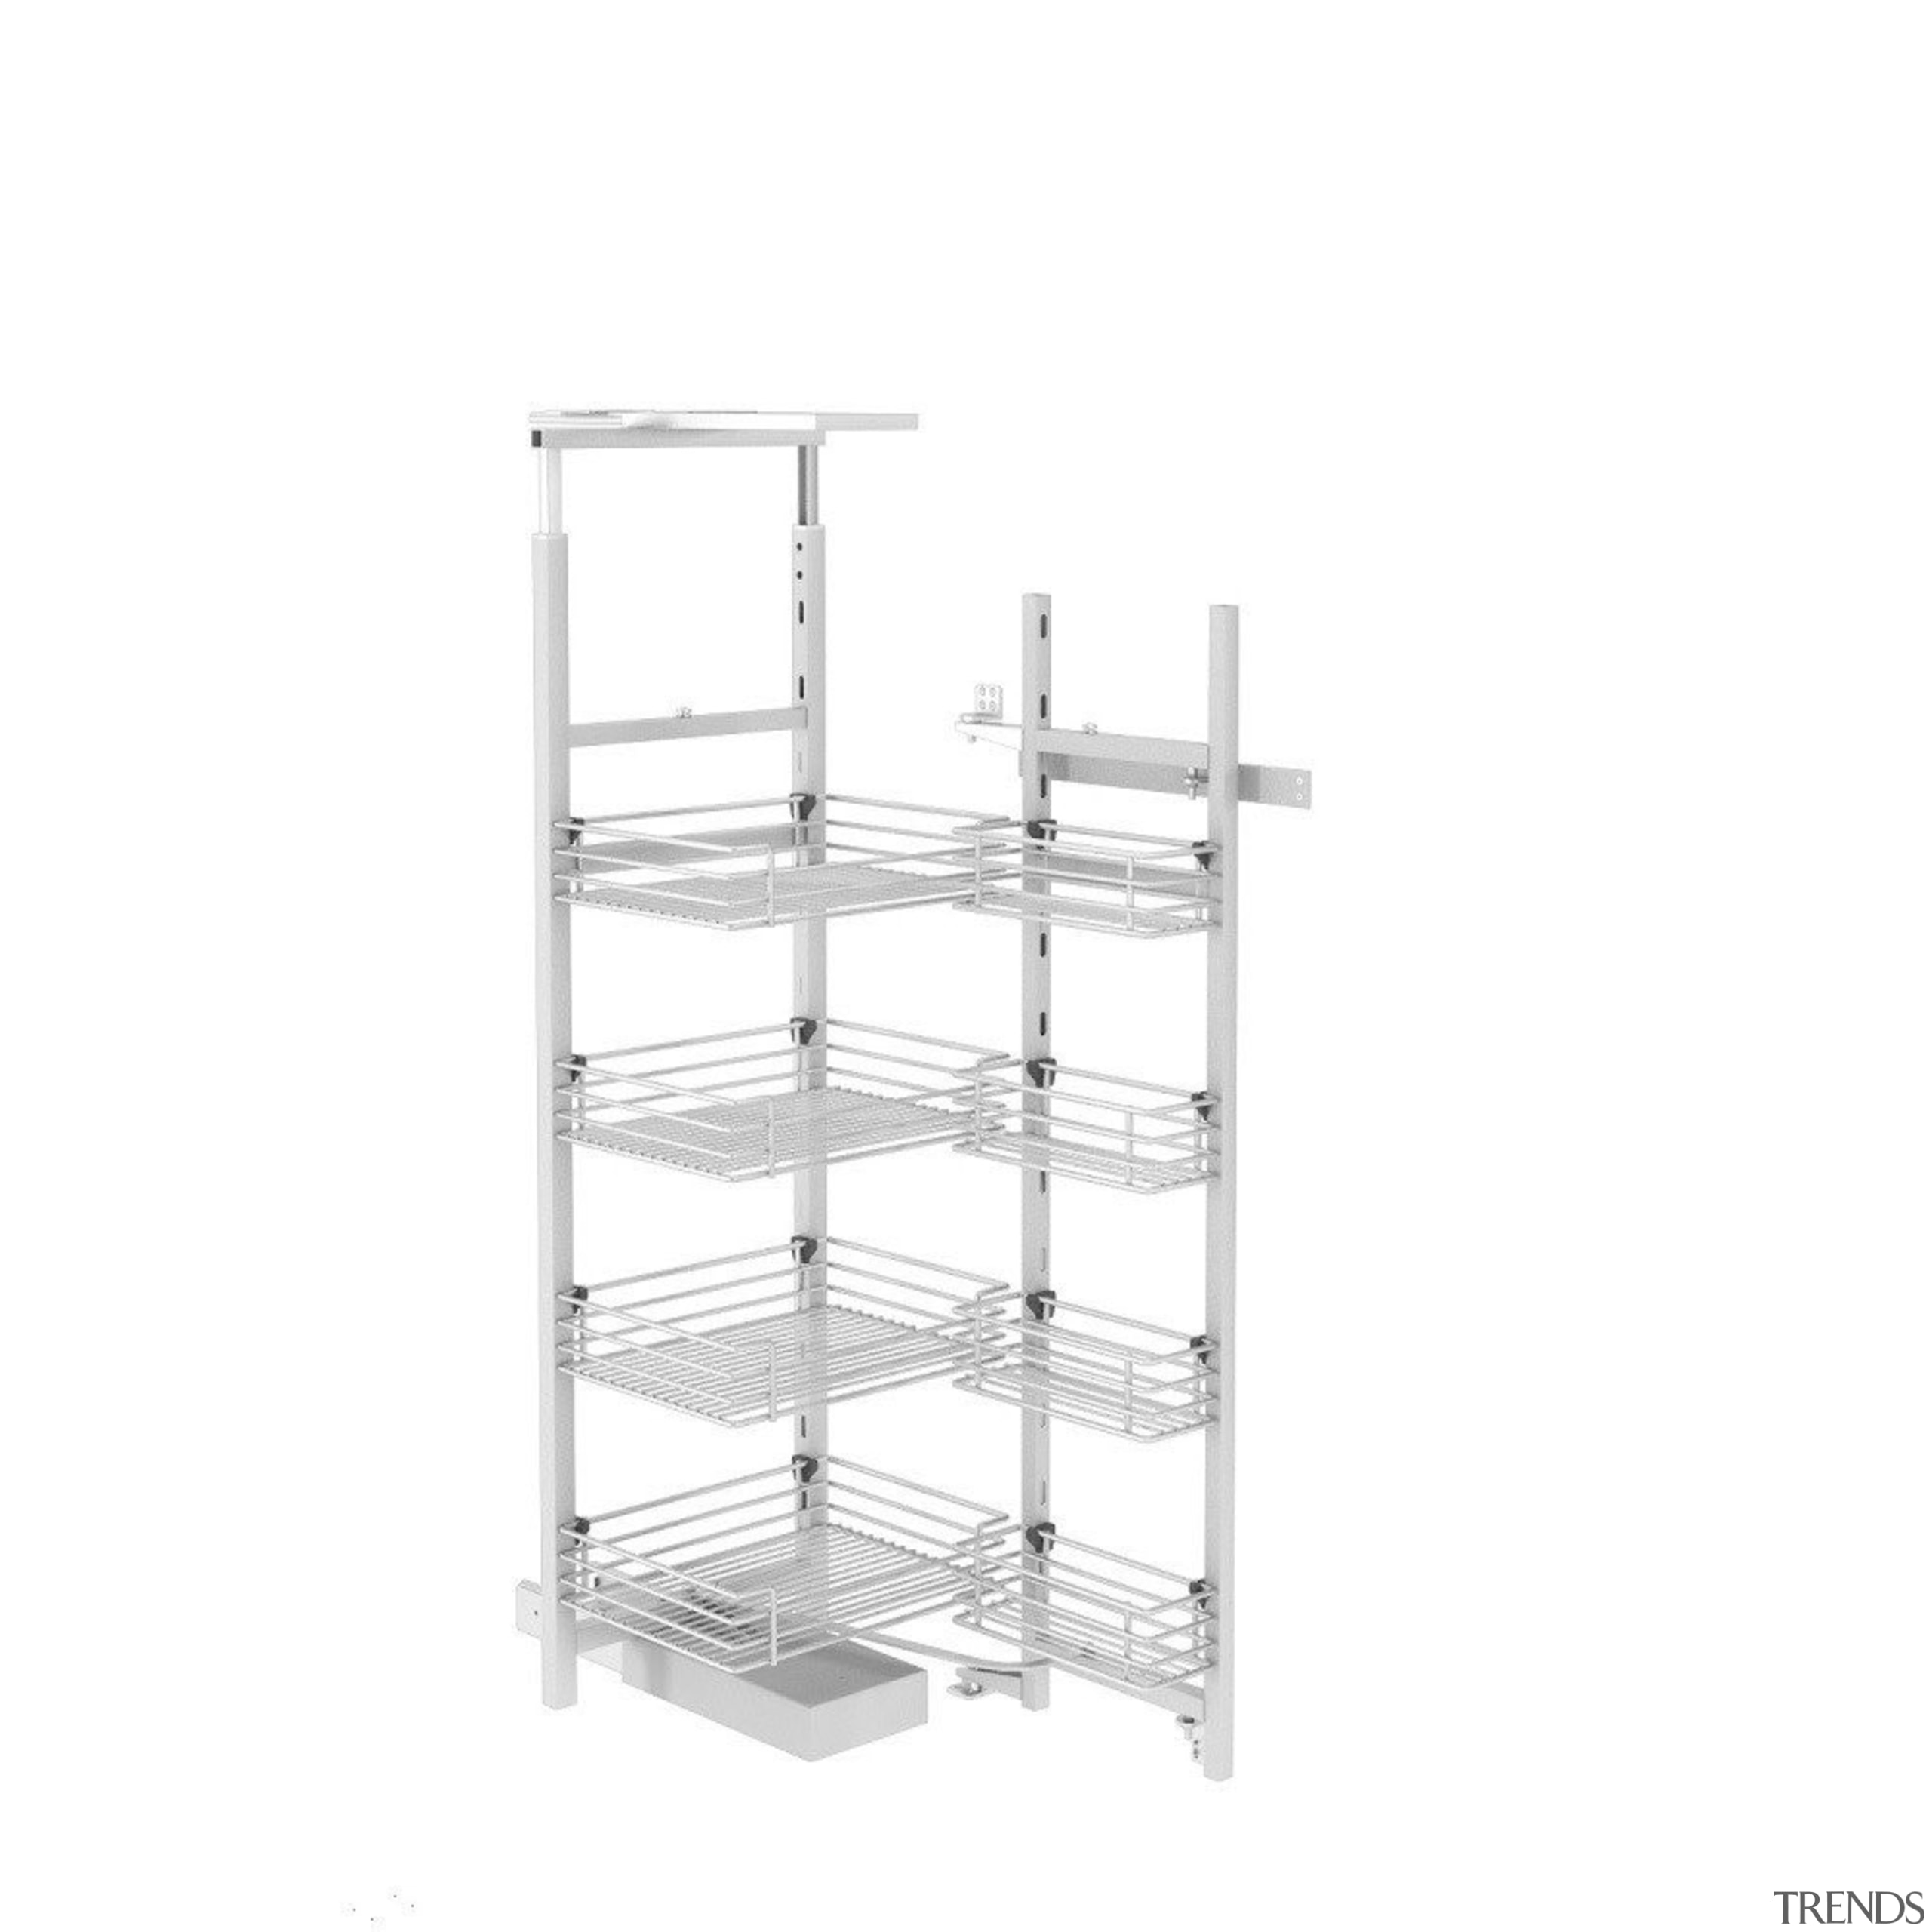 Giamo Short Chef Larder with Wire Shelves Rear angle, furniture, product, shelf, shelving, structure, white